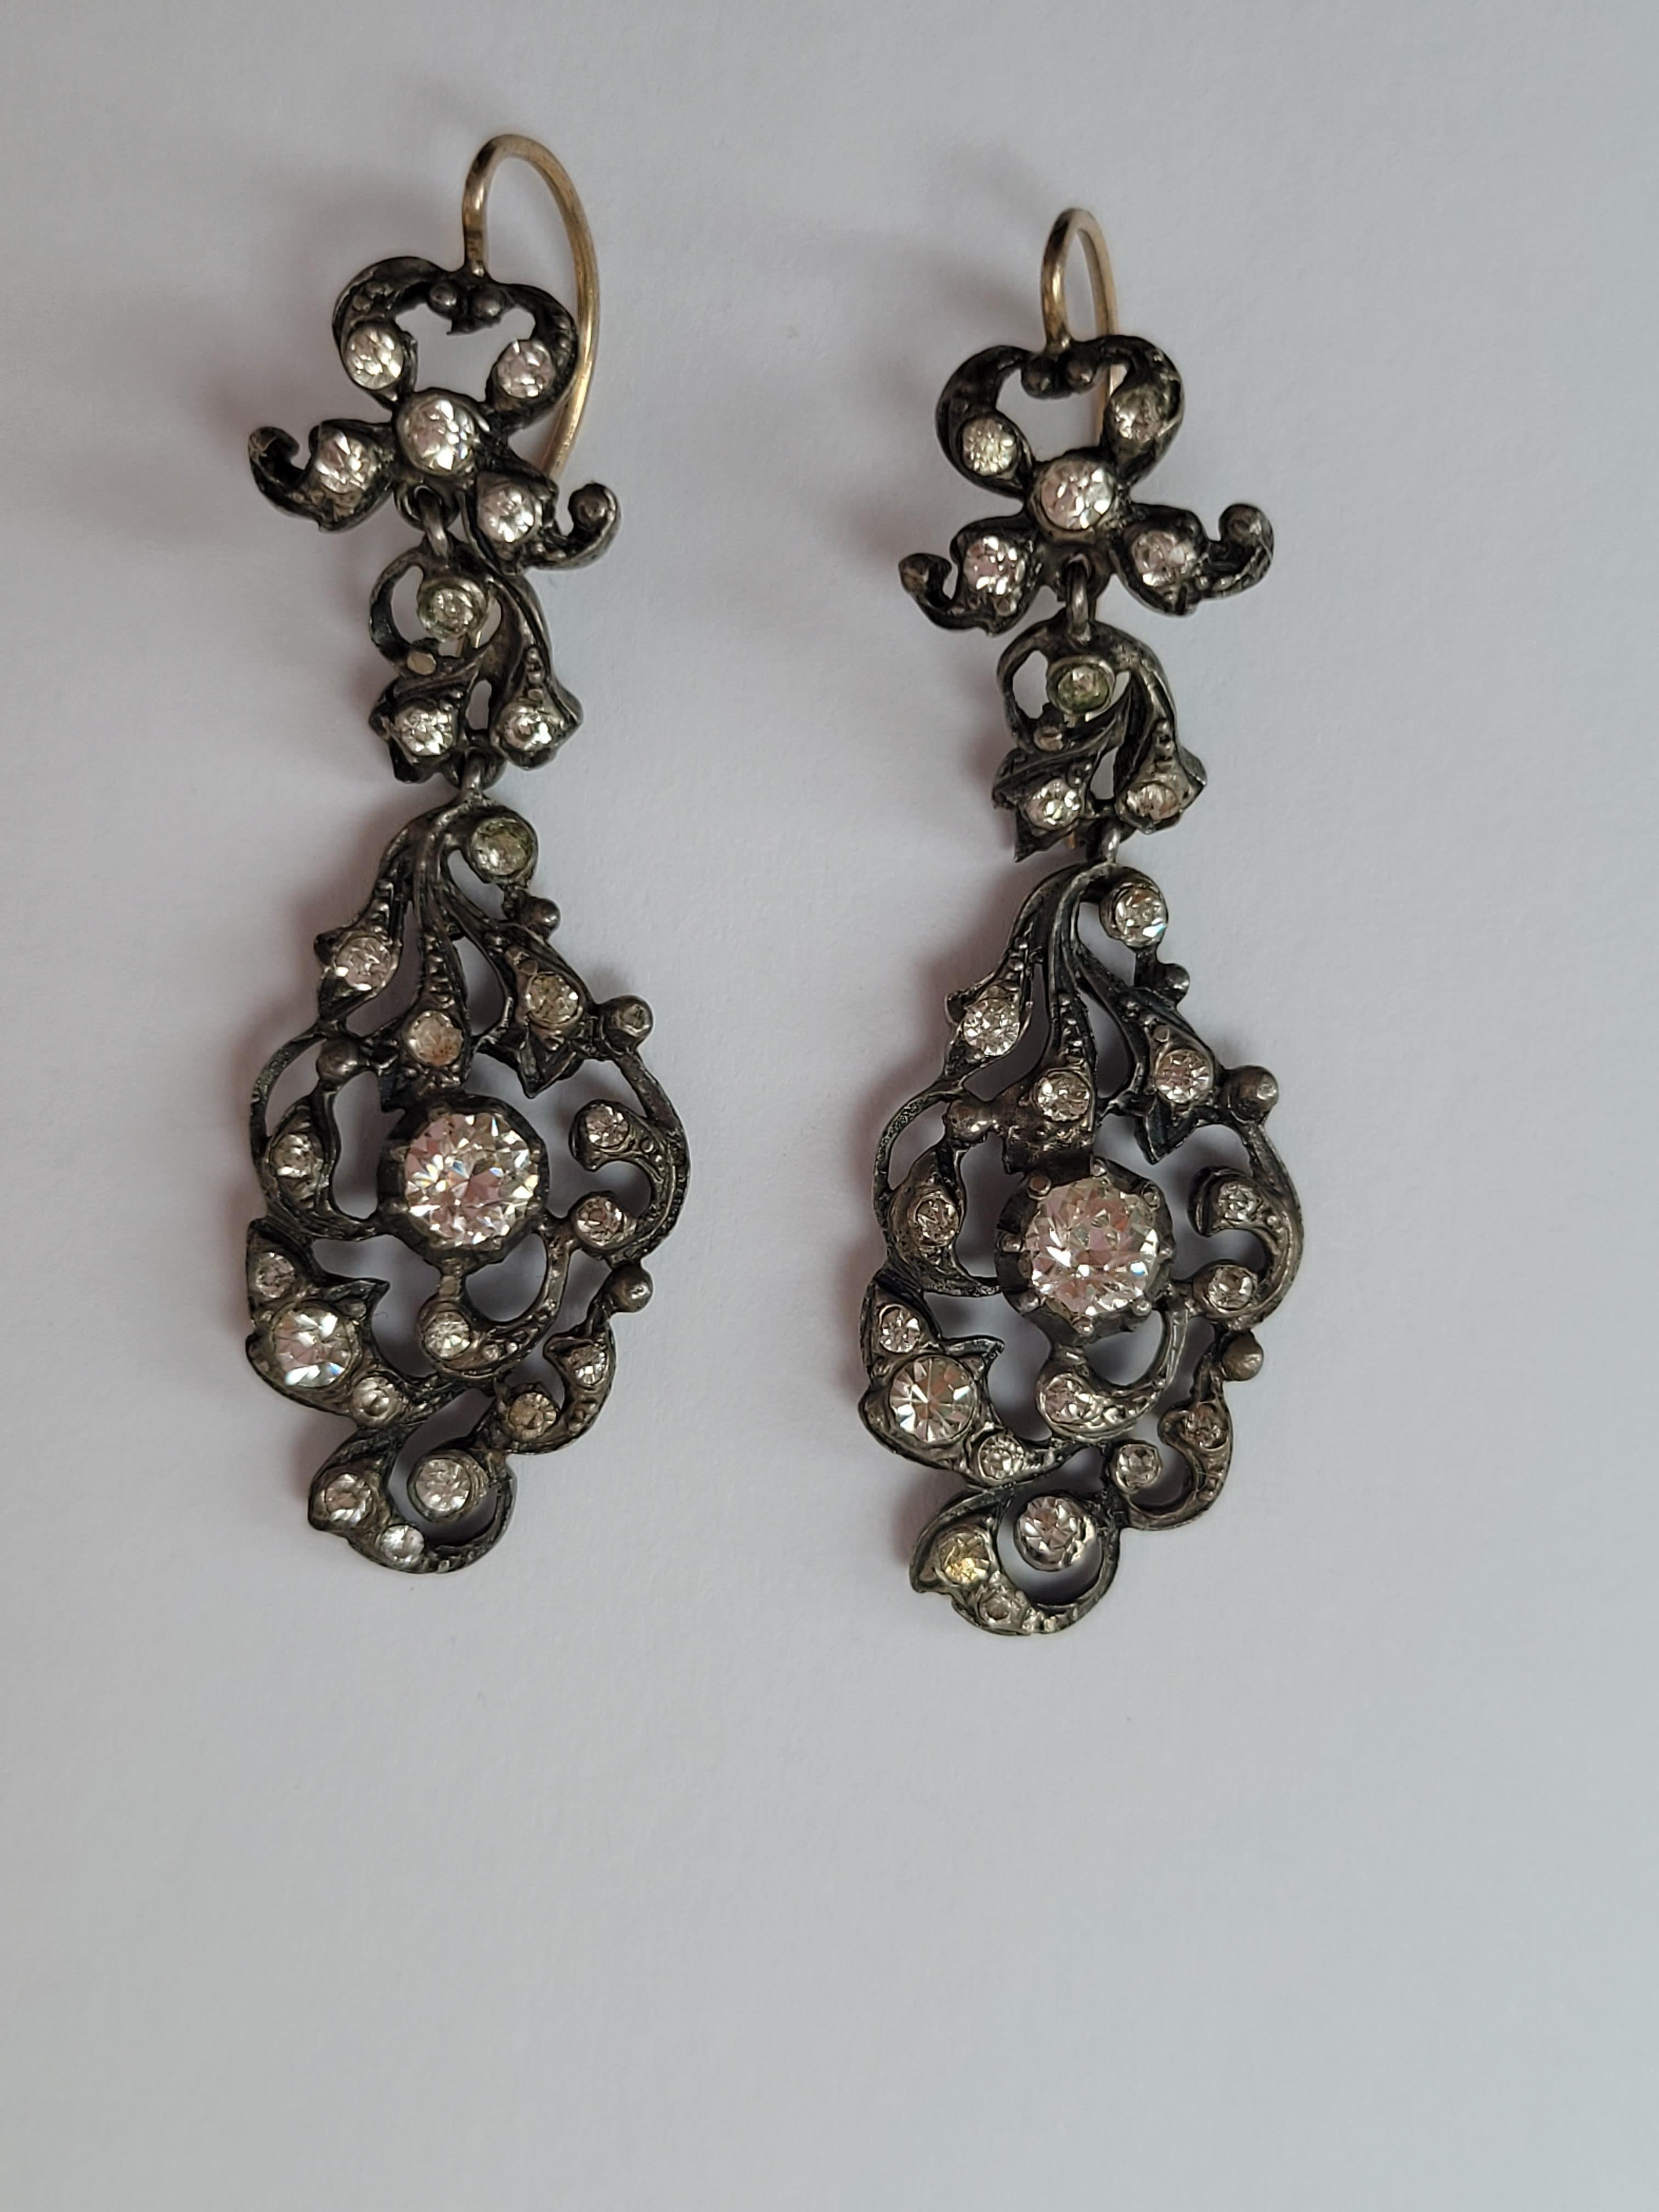 Spectacular Antique Edwardian Gold Silver Paste Drop Earrings For Sale 3